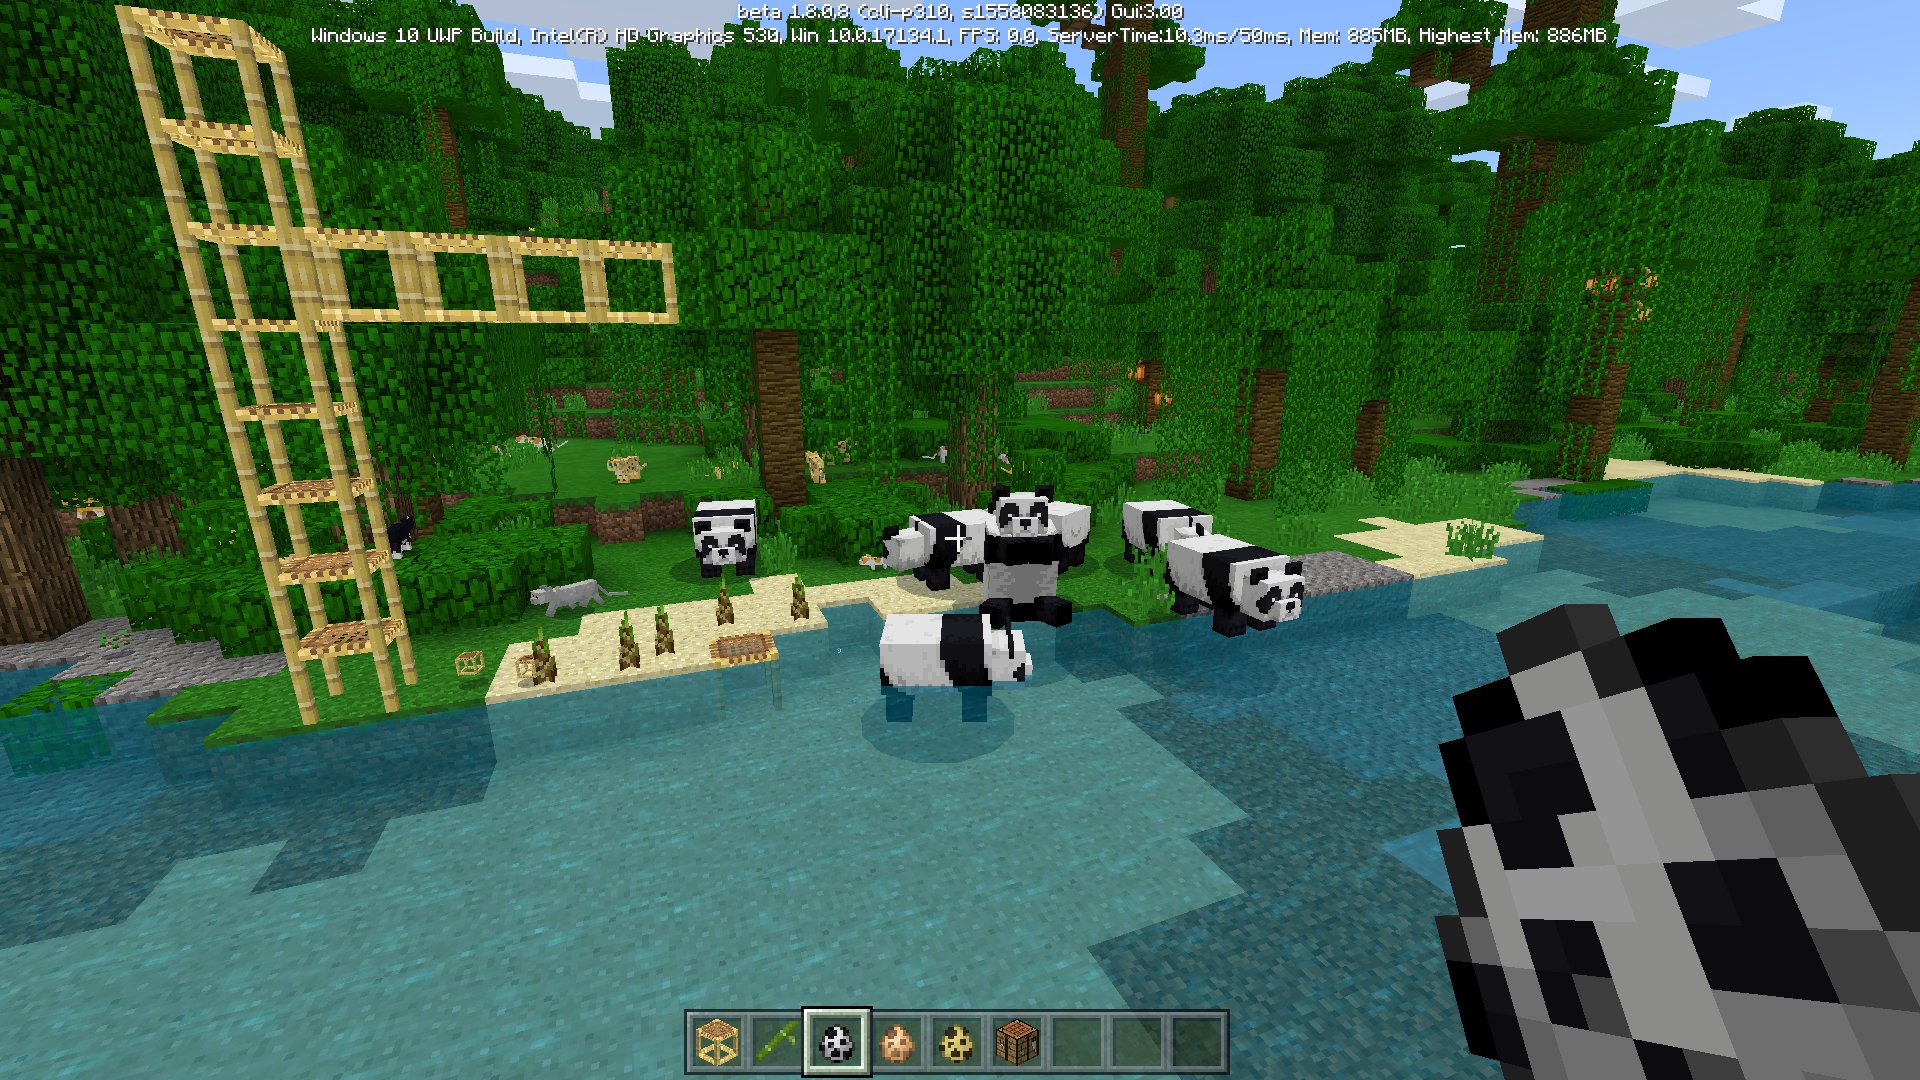 Minecraft News Pandas Scaffolding Cats And Bamboo Have Been Added In The Mcpe Minecraft 1 8 0 8 Beta Out Now